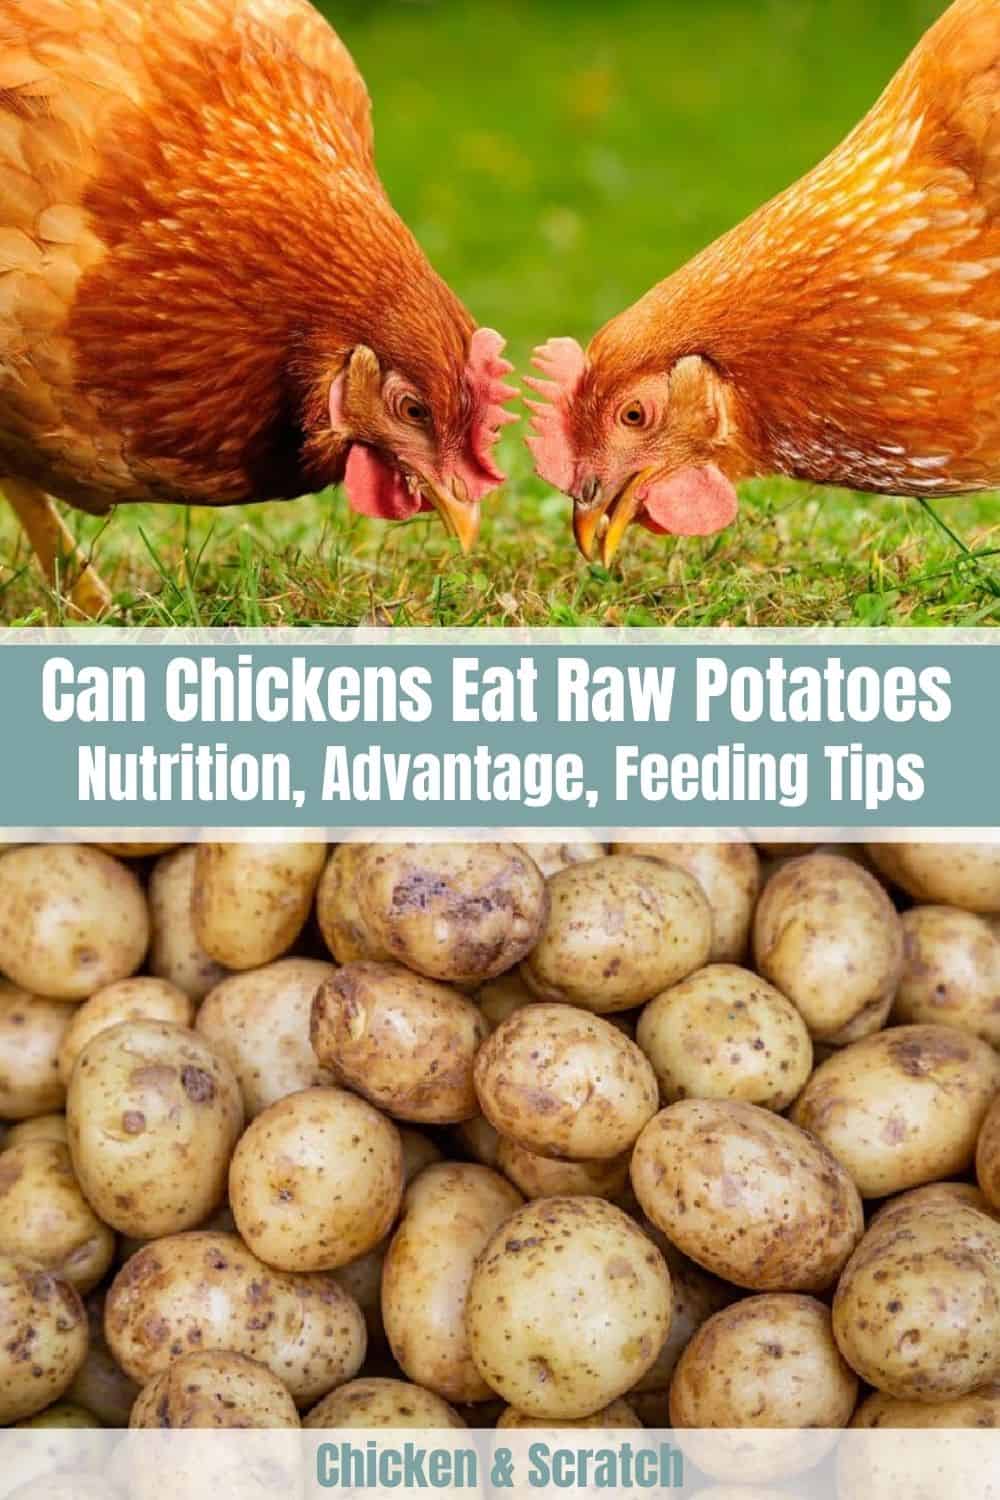 Can Chickens Eat Raw Potatoes? (Nutrition, Advantage, Feeding Tips)